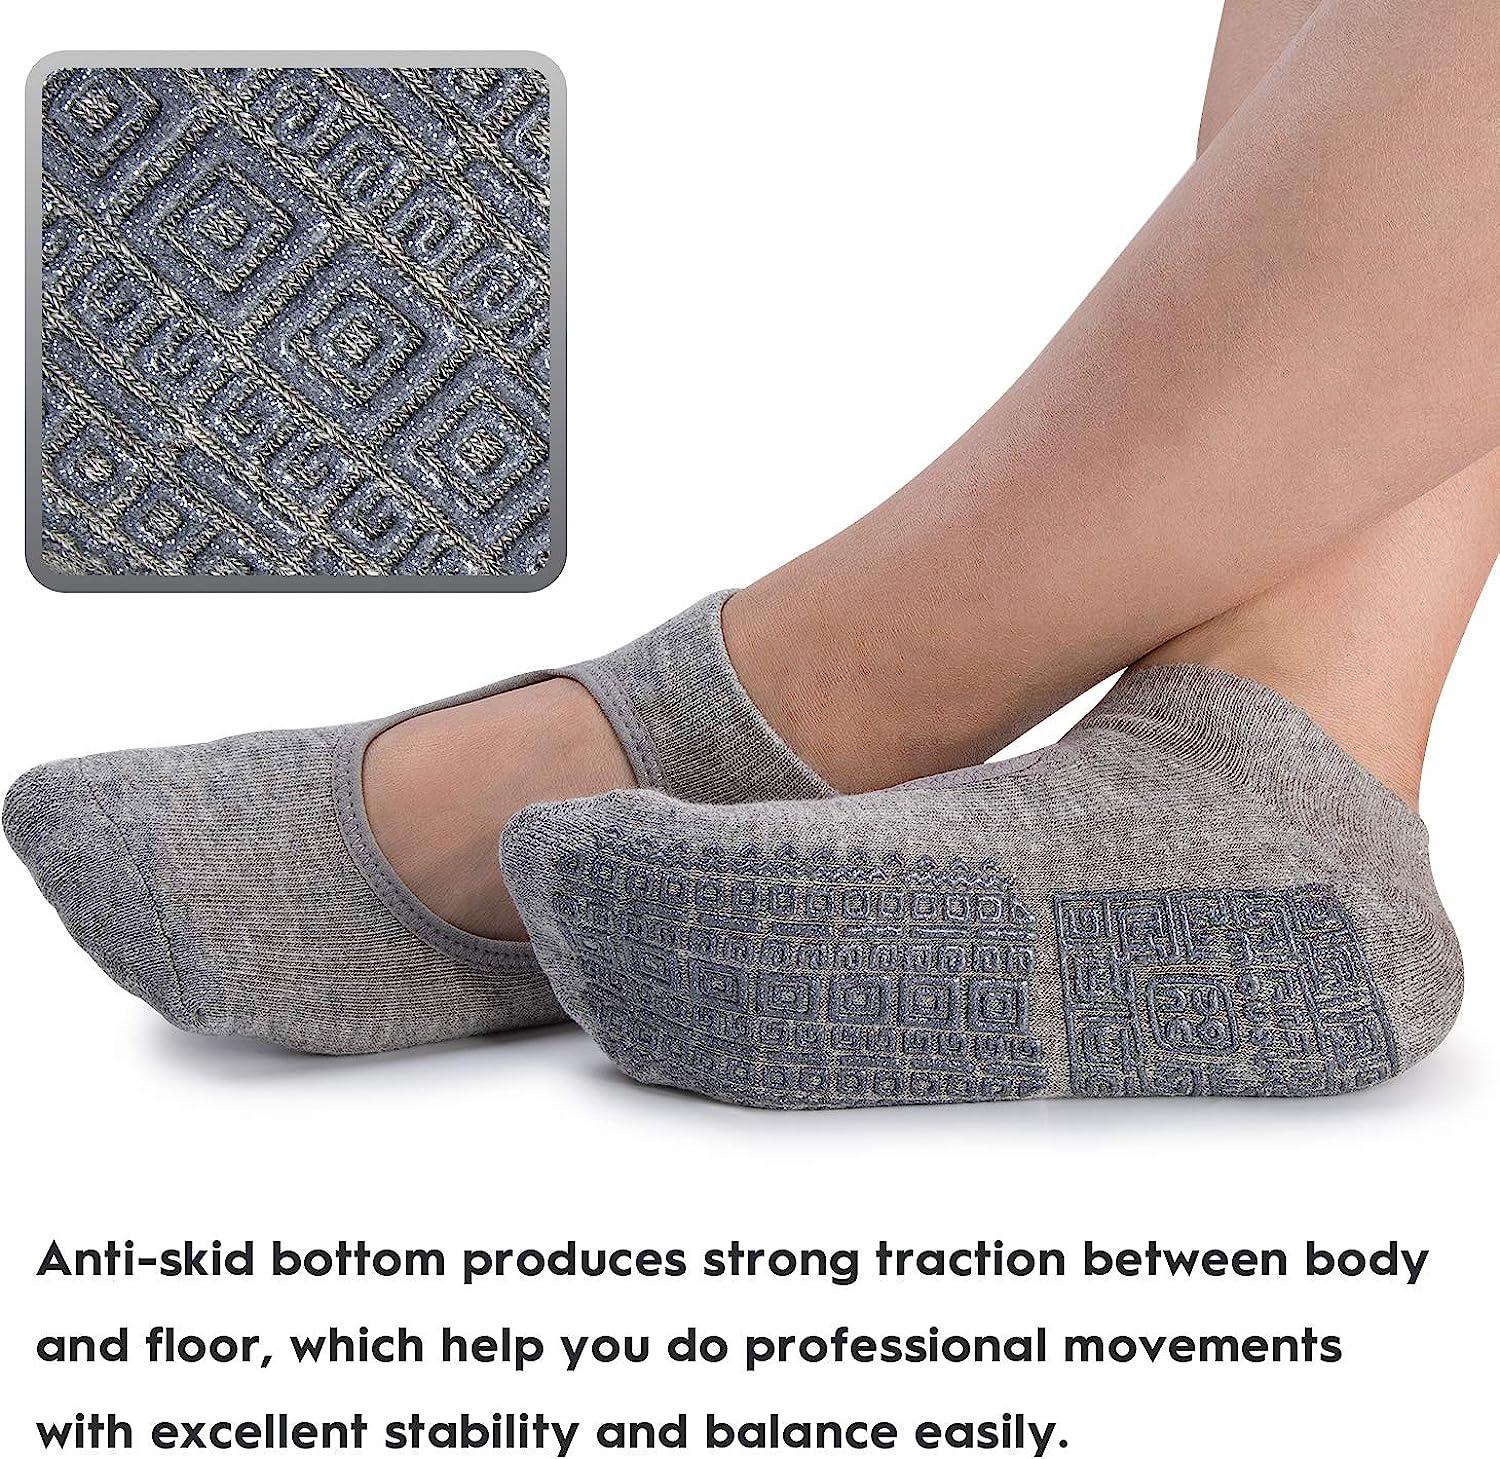 unenow Non Slip Grip Yoga Socks for Women with Cushion for Pilates